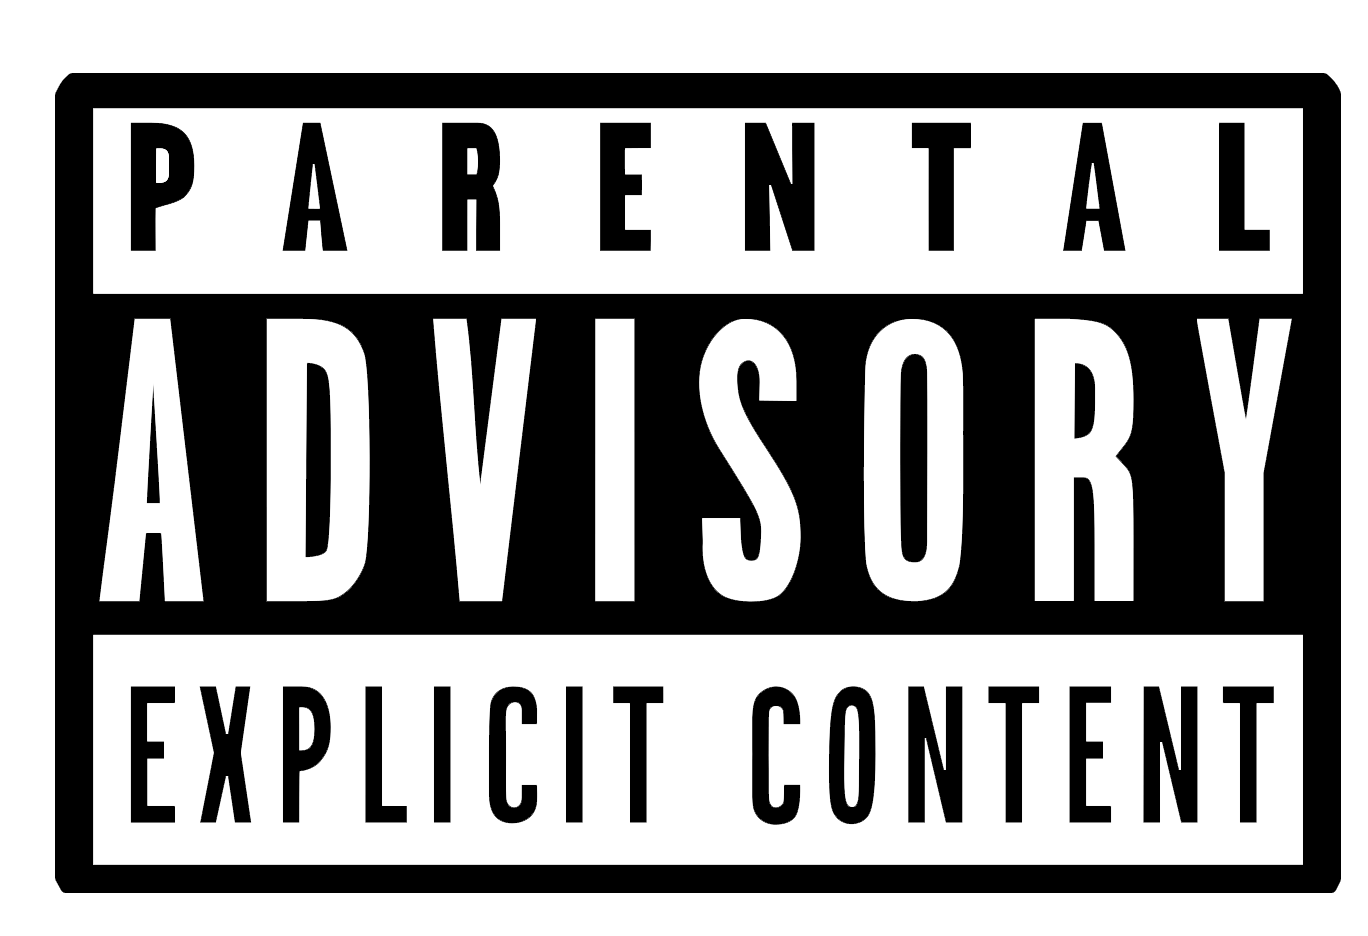 Parental Advisory Transparent PNG Pictures - Free Icons and PNG Backgrounds